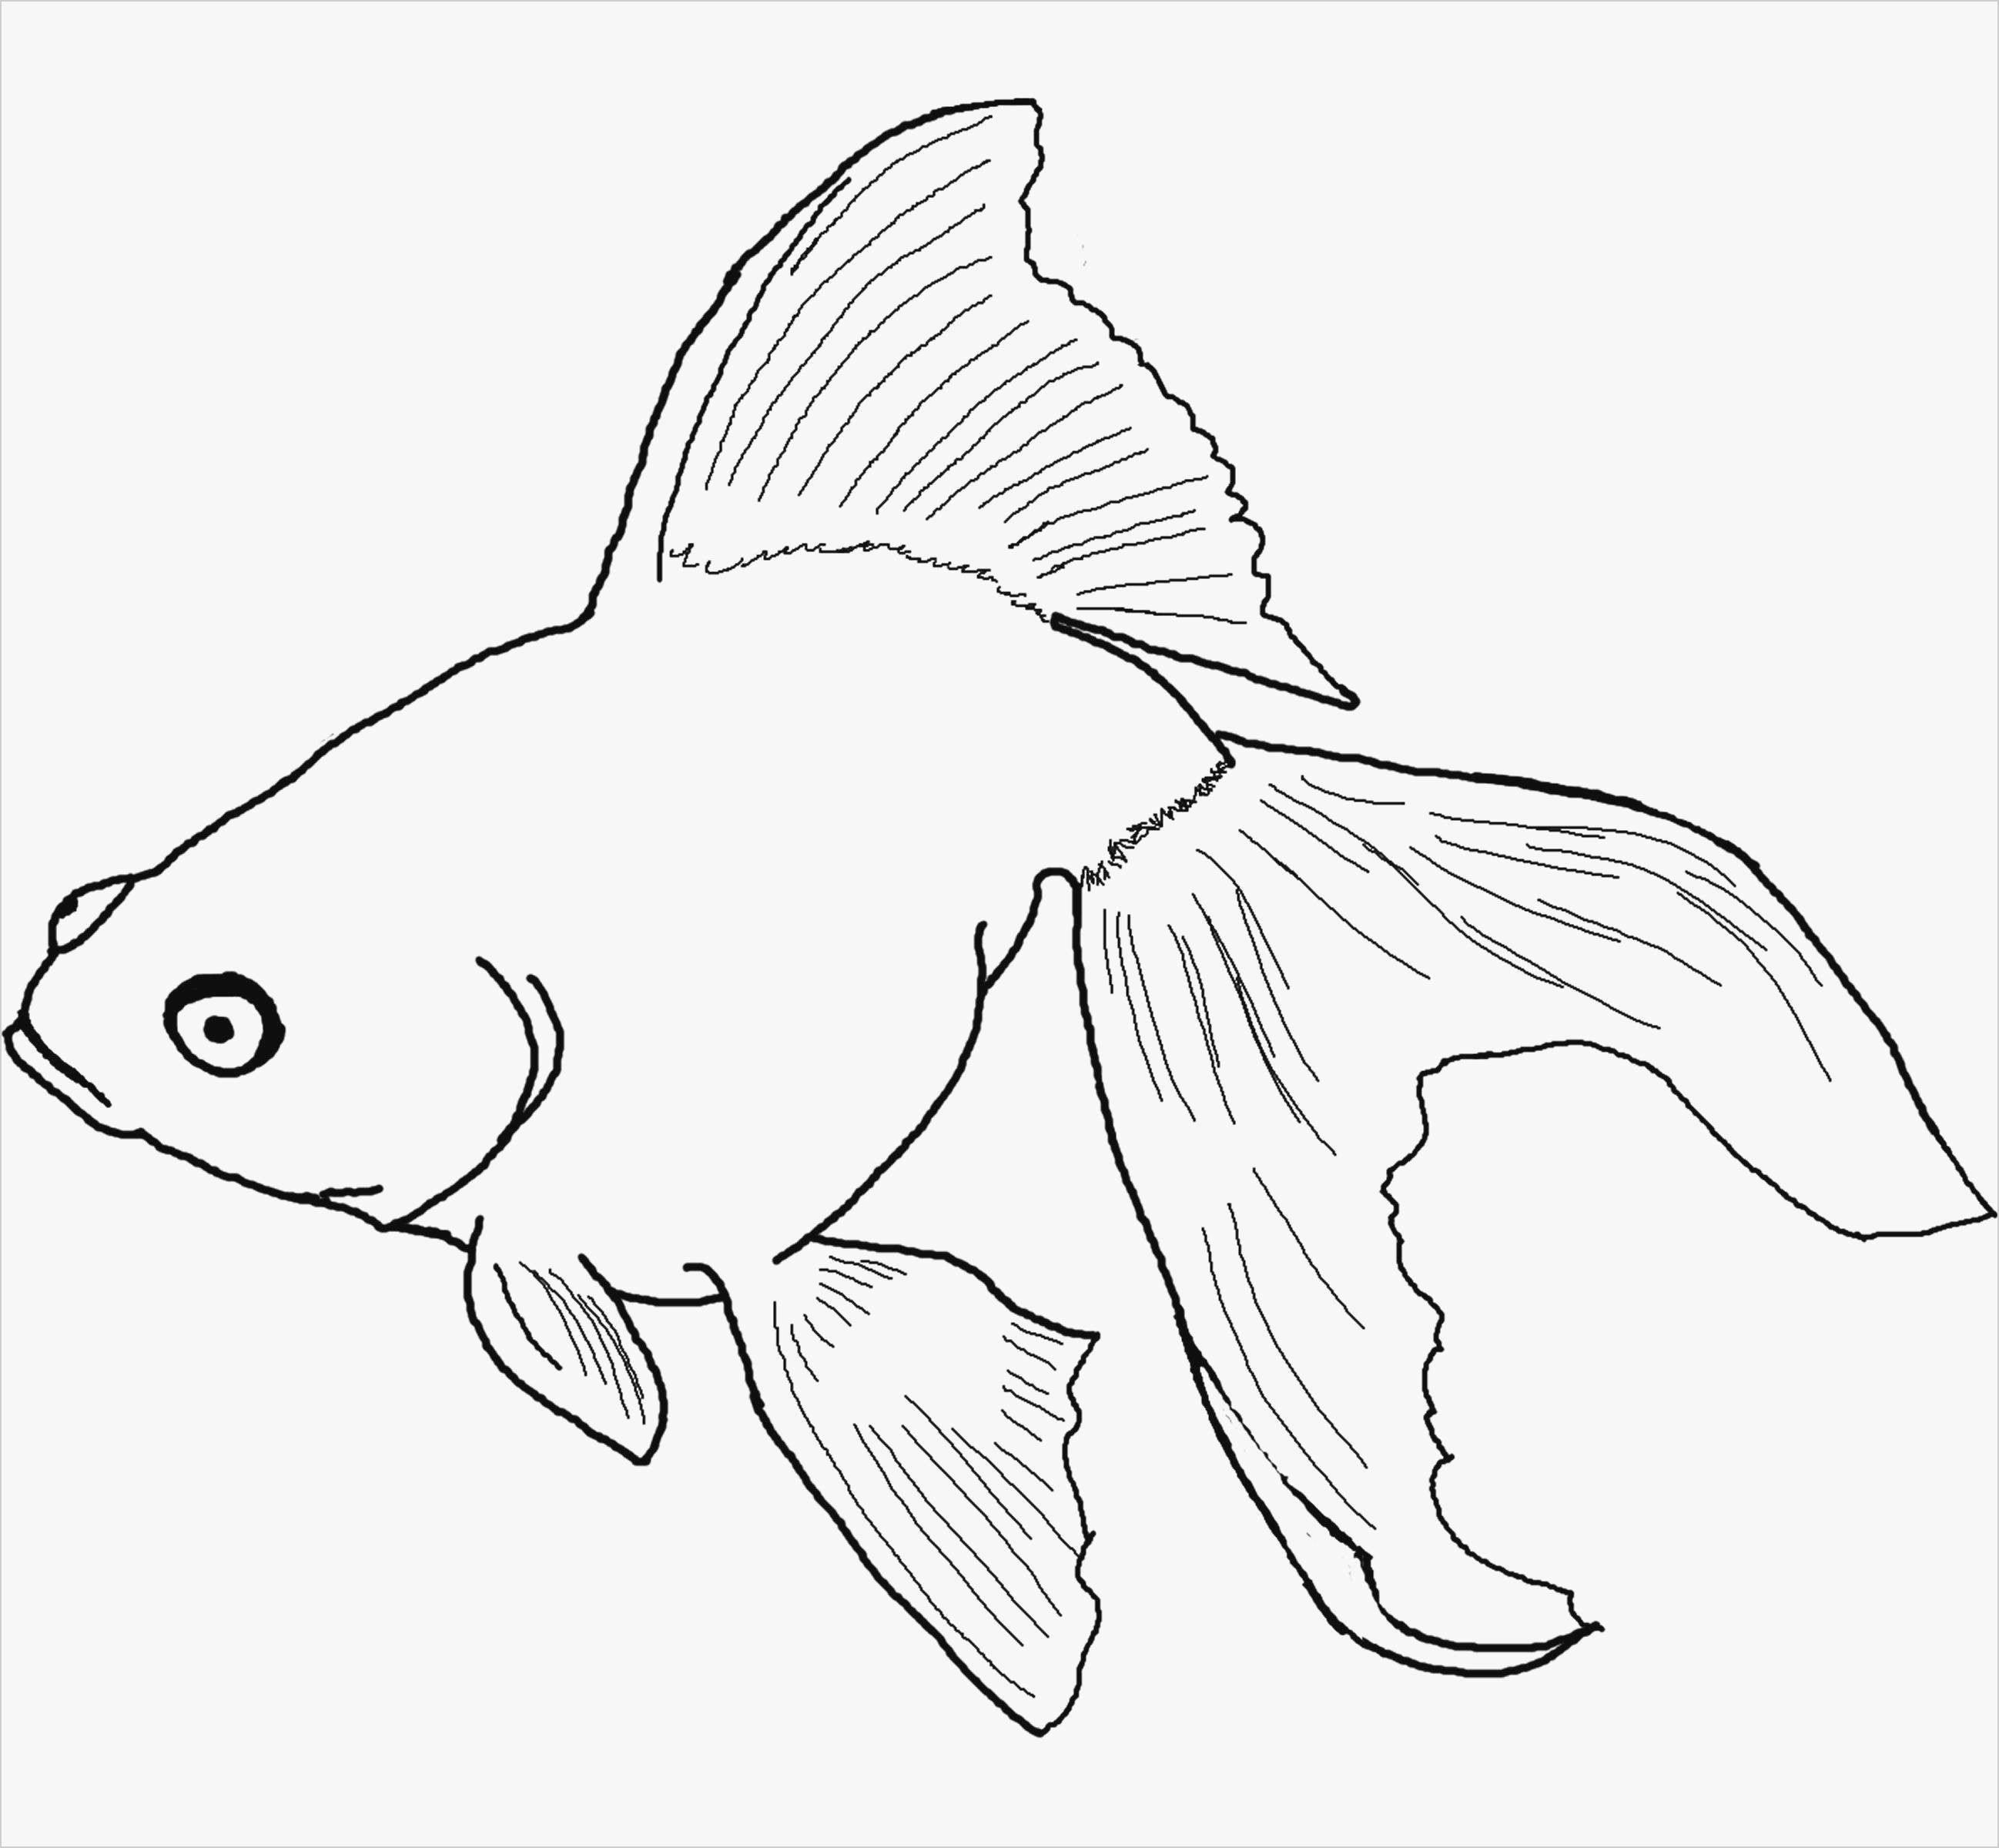 Coloring Pages Fishing 61 Elegant Jesus Fishing Boat Coloring Page Brainstormchi